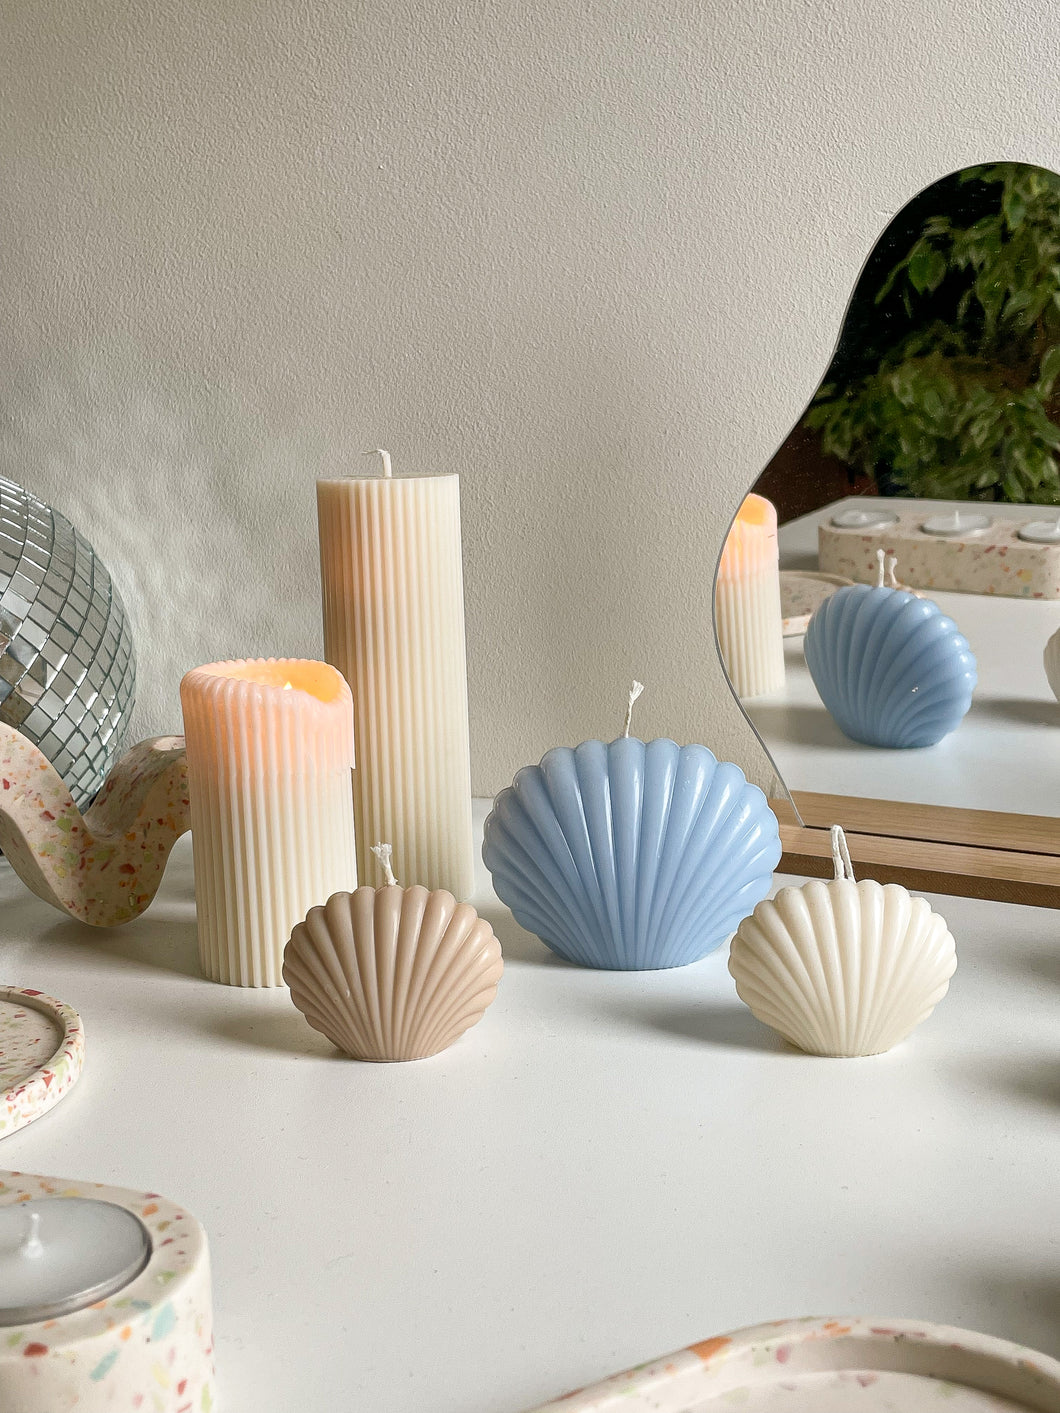 Shell candles